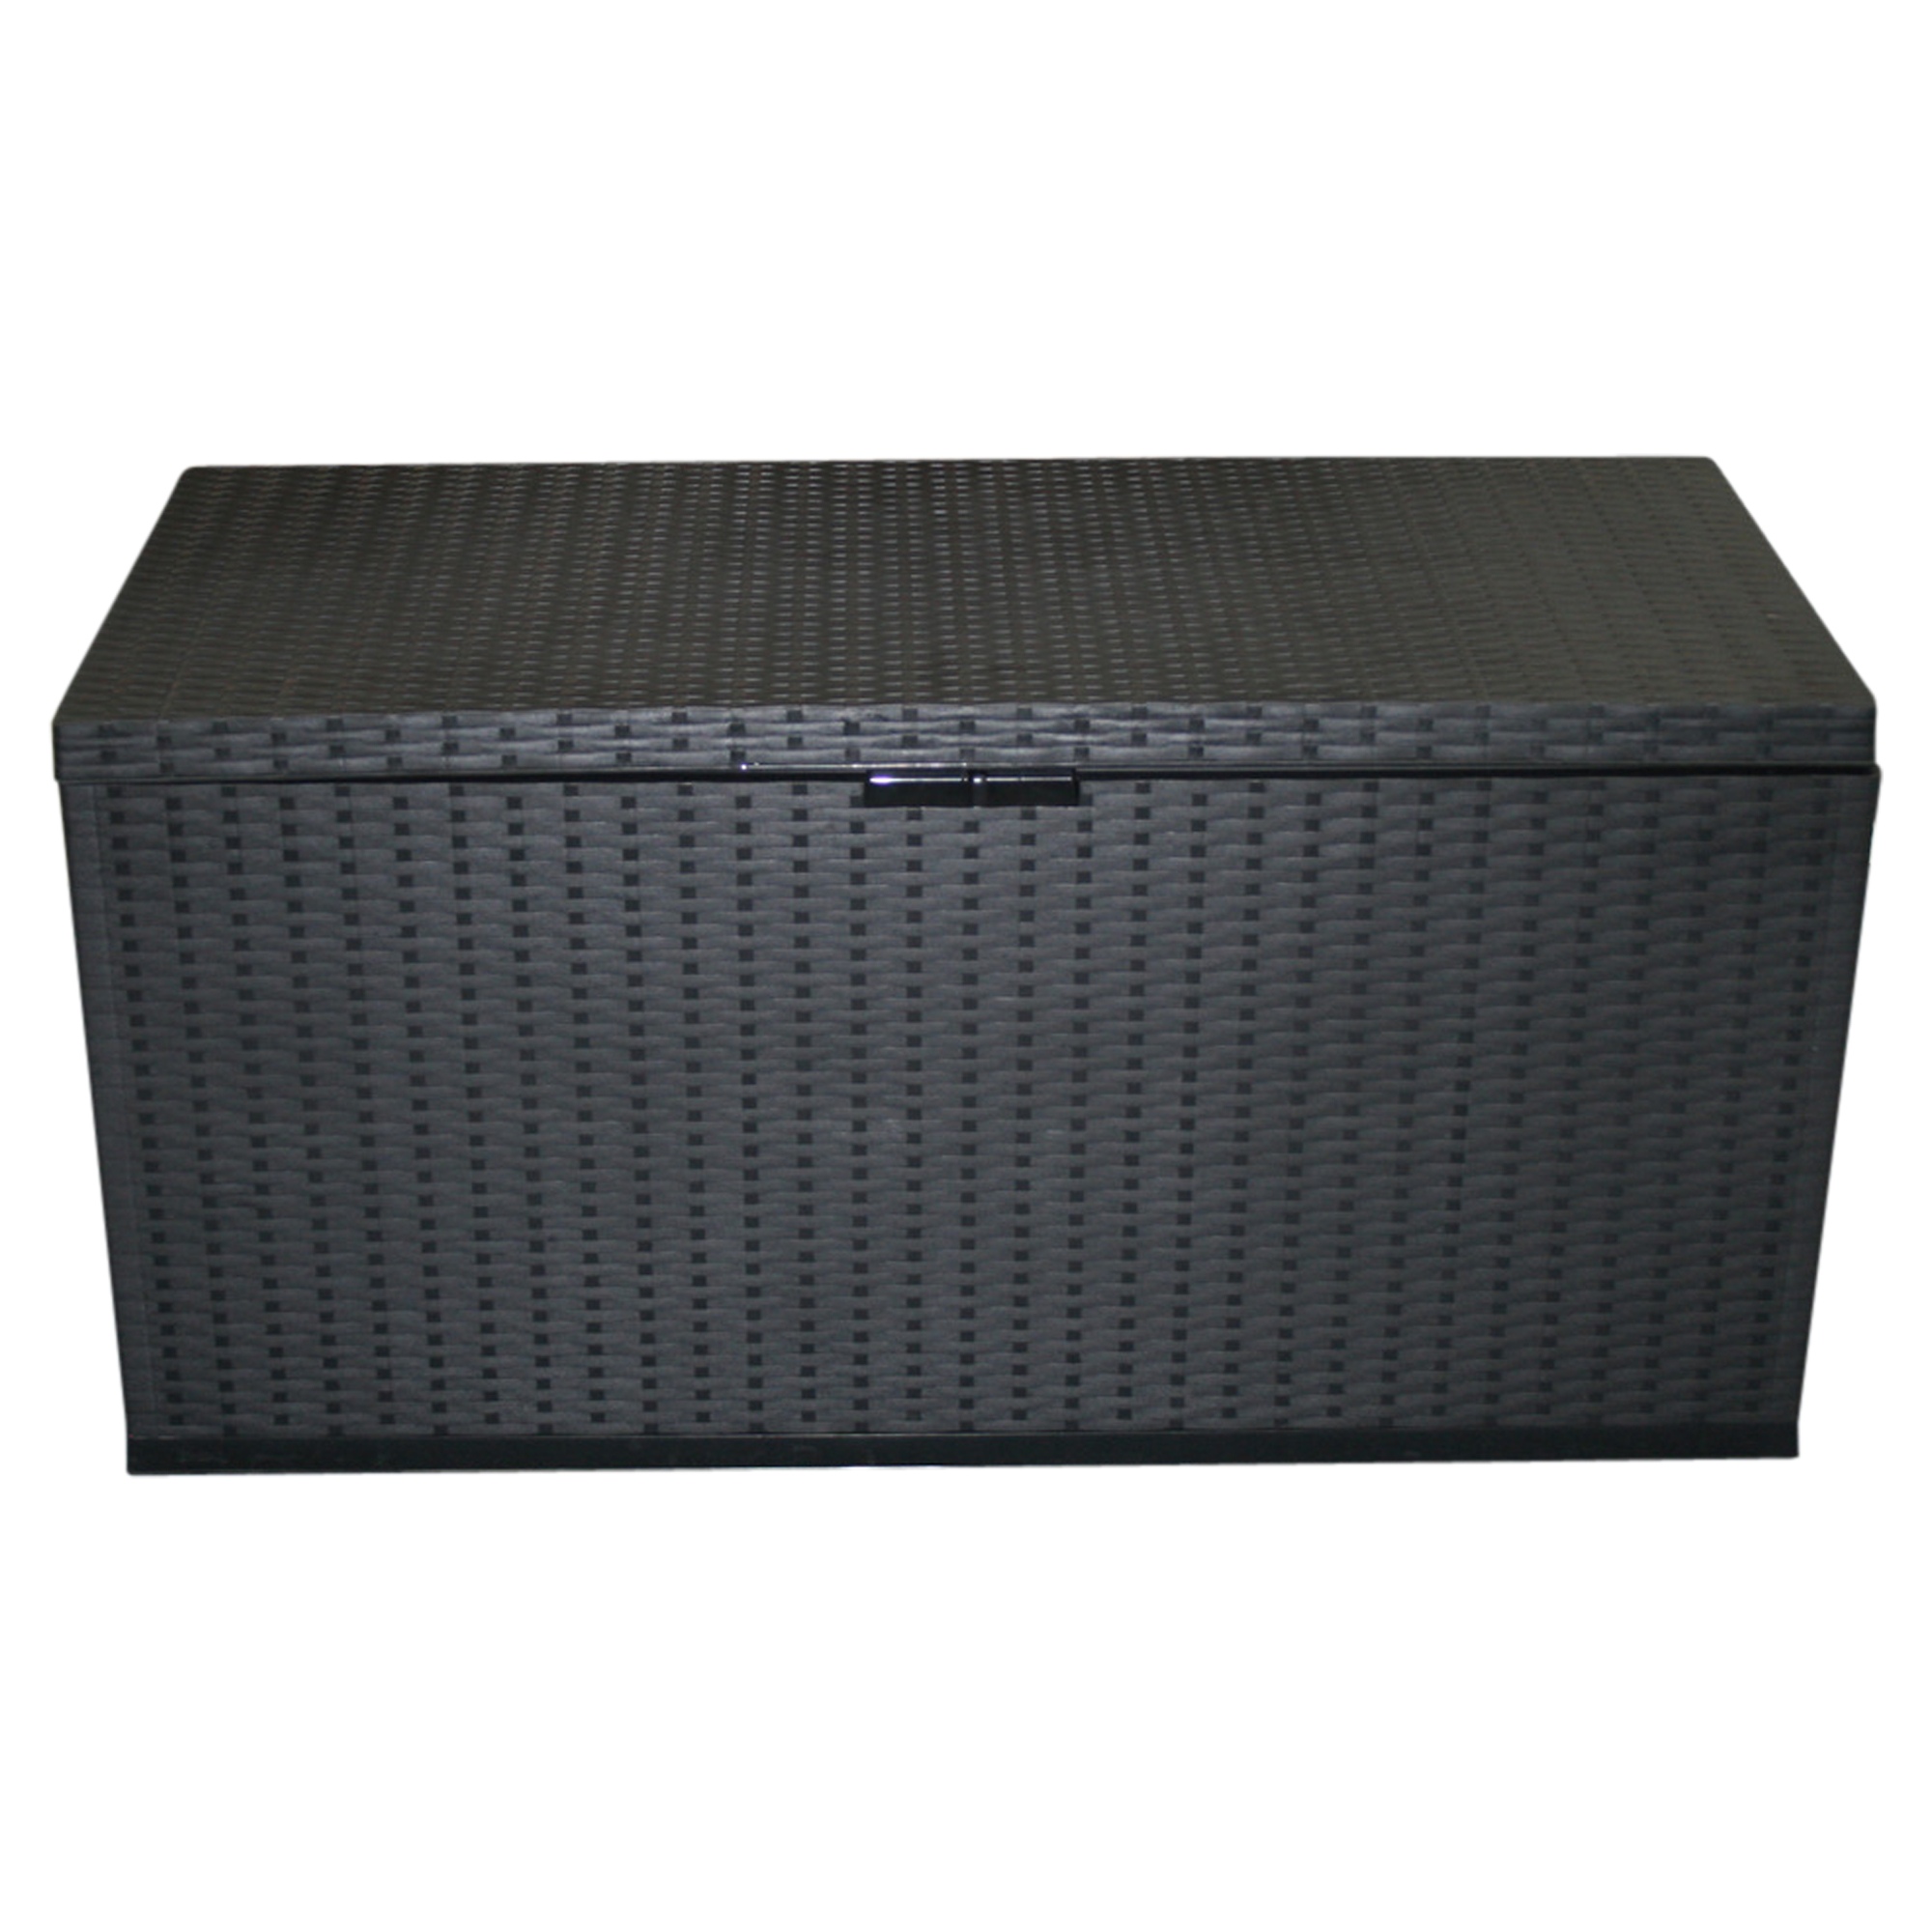 350l Large Outdoor Garden Storage Roller Box Plastic Rattan Container Chest Lid 8711295087165 Ebay